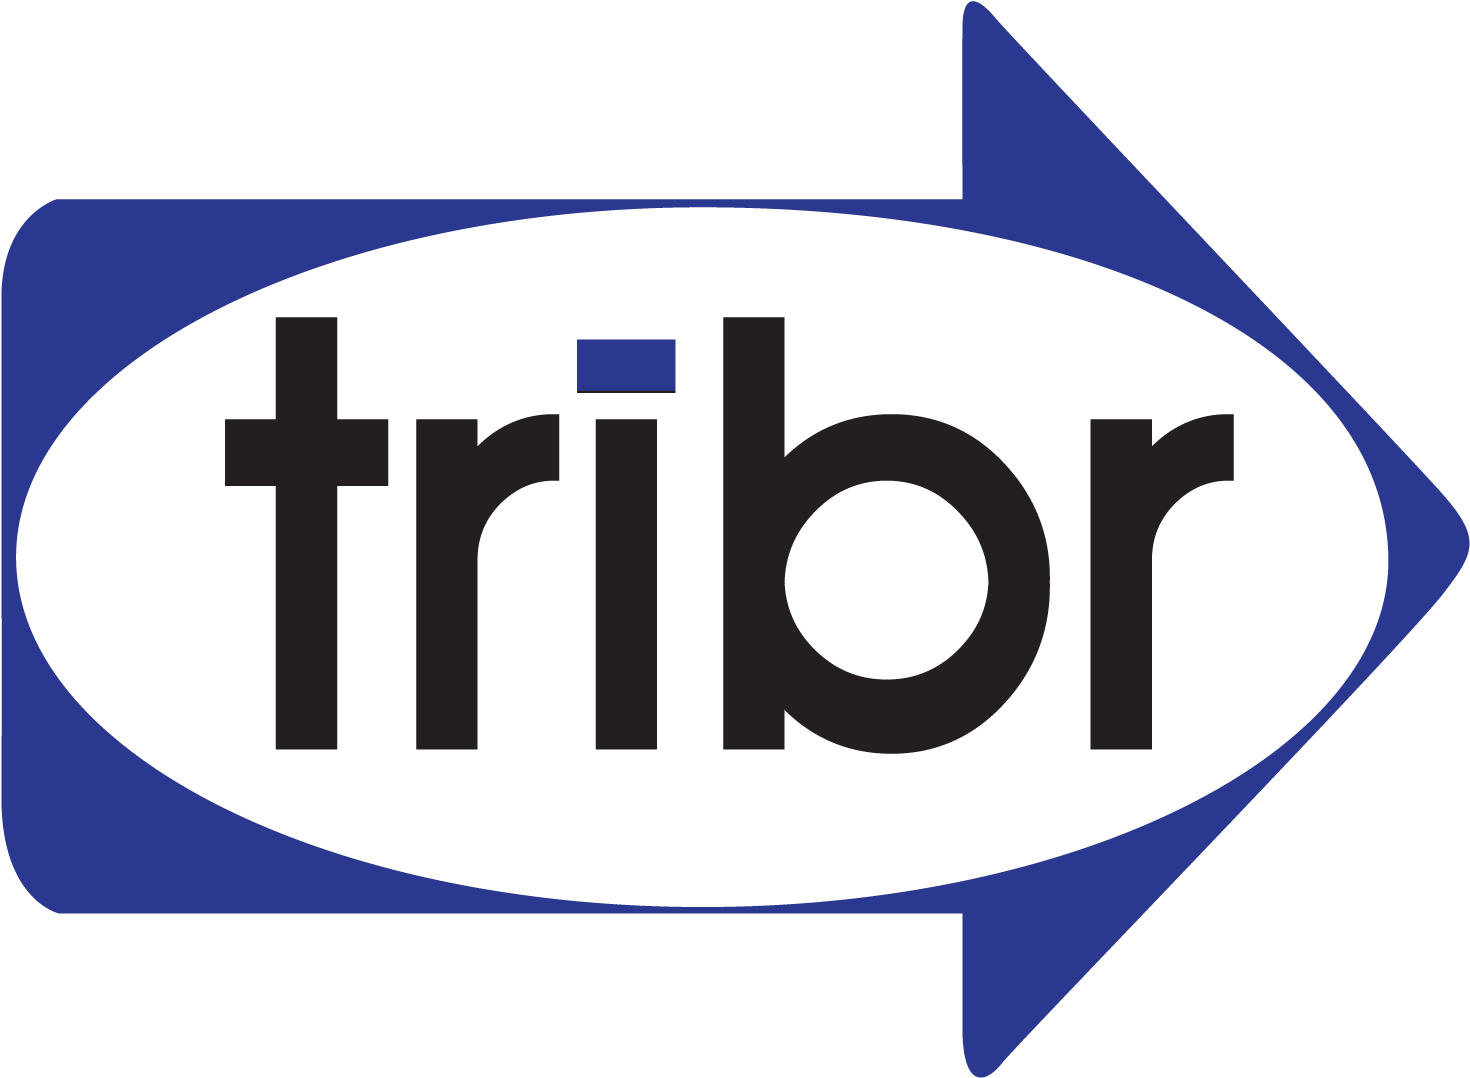 Tribr - Ethos Distributed Solutions (1508x1100)